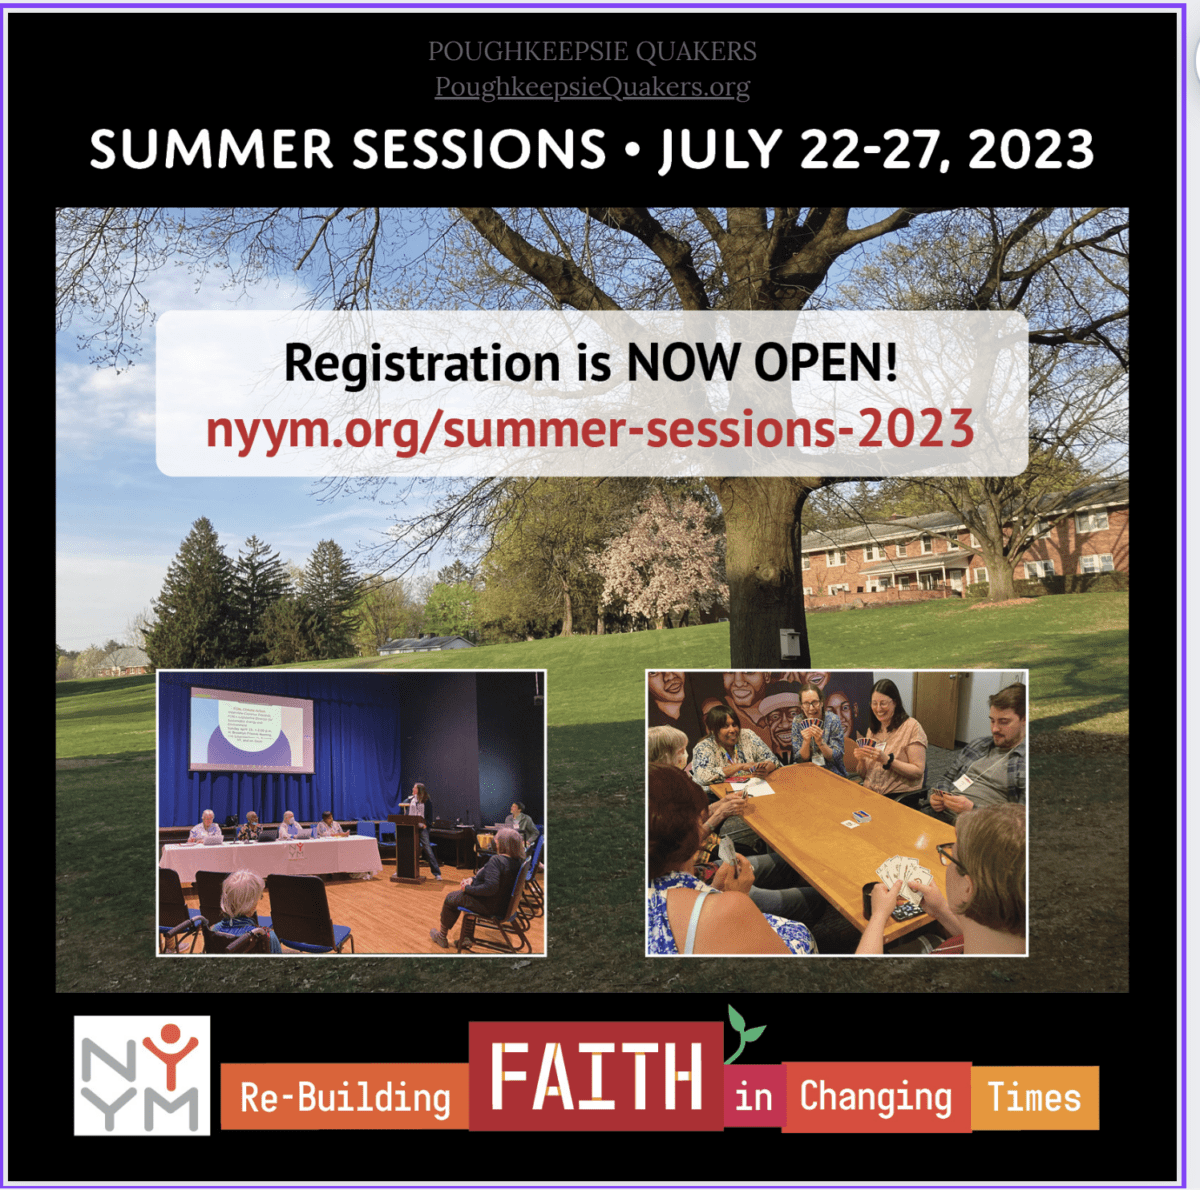 Registration for the July 22-027, 2023 Summer Sessions is now open for the NYYM Re-Building Faith in Changing Times